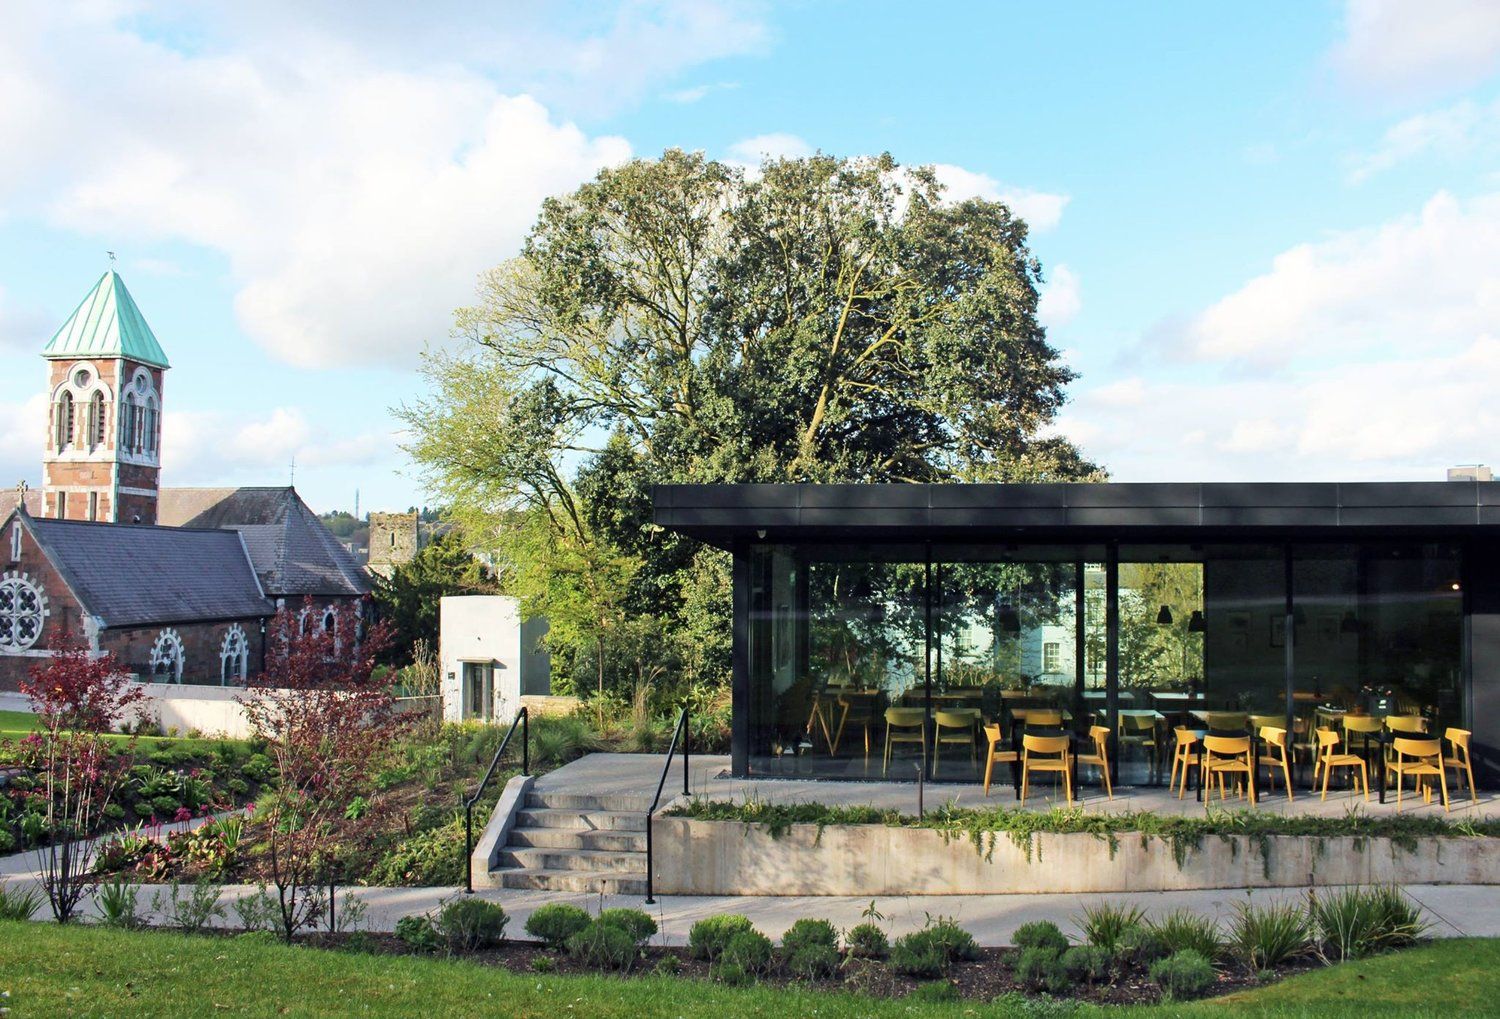 One of the prettiest outdoor dining spots in Cork reopens today